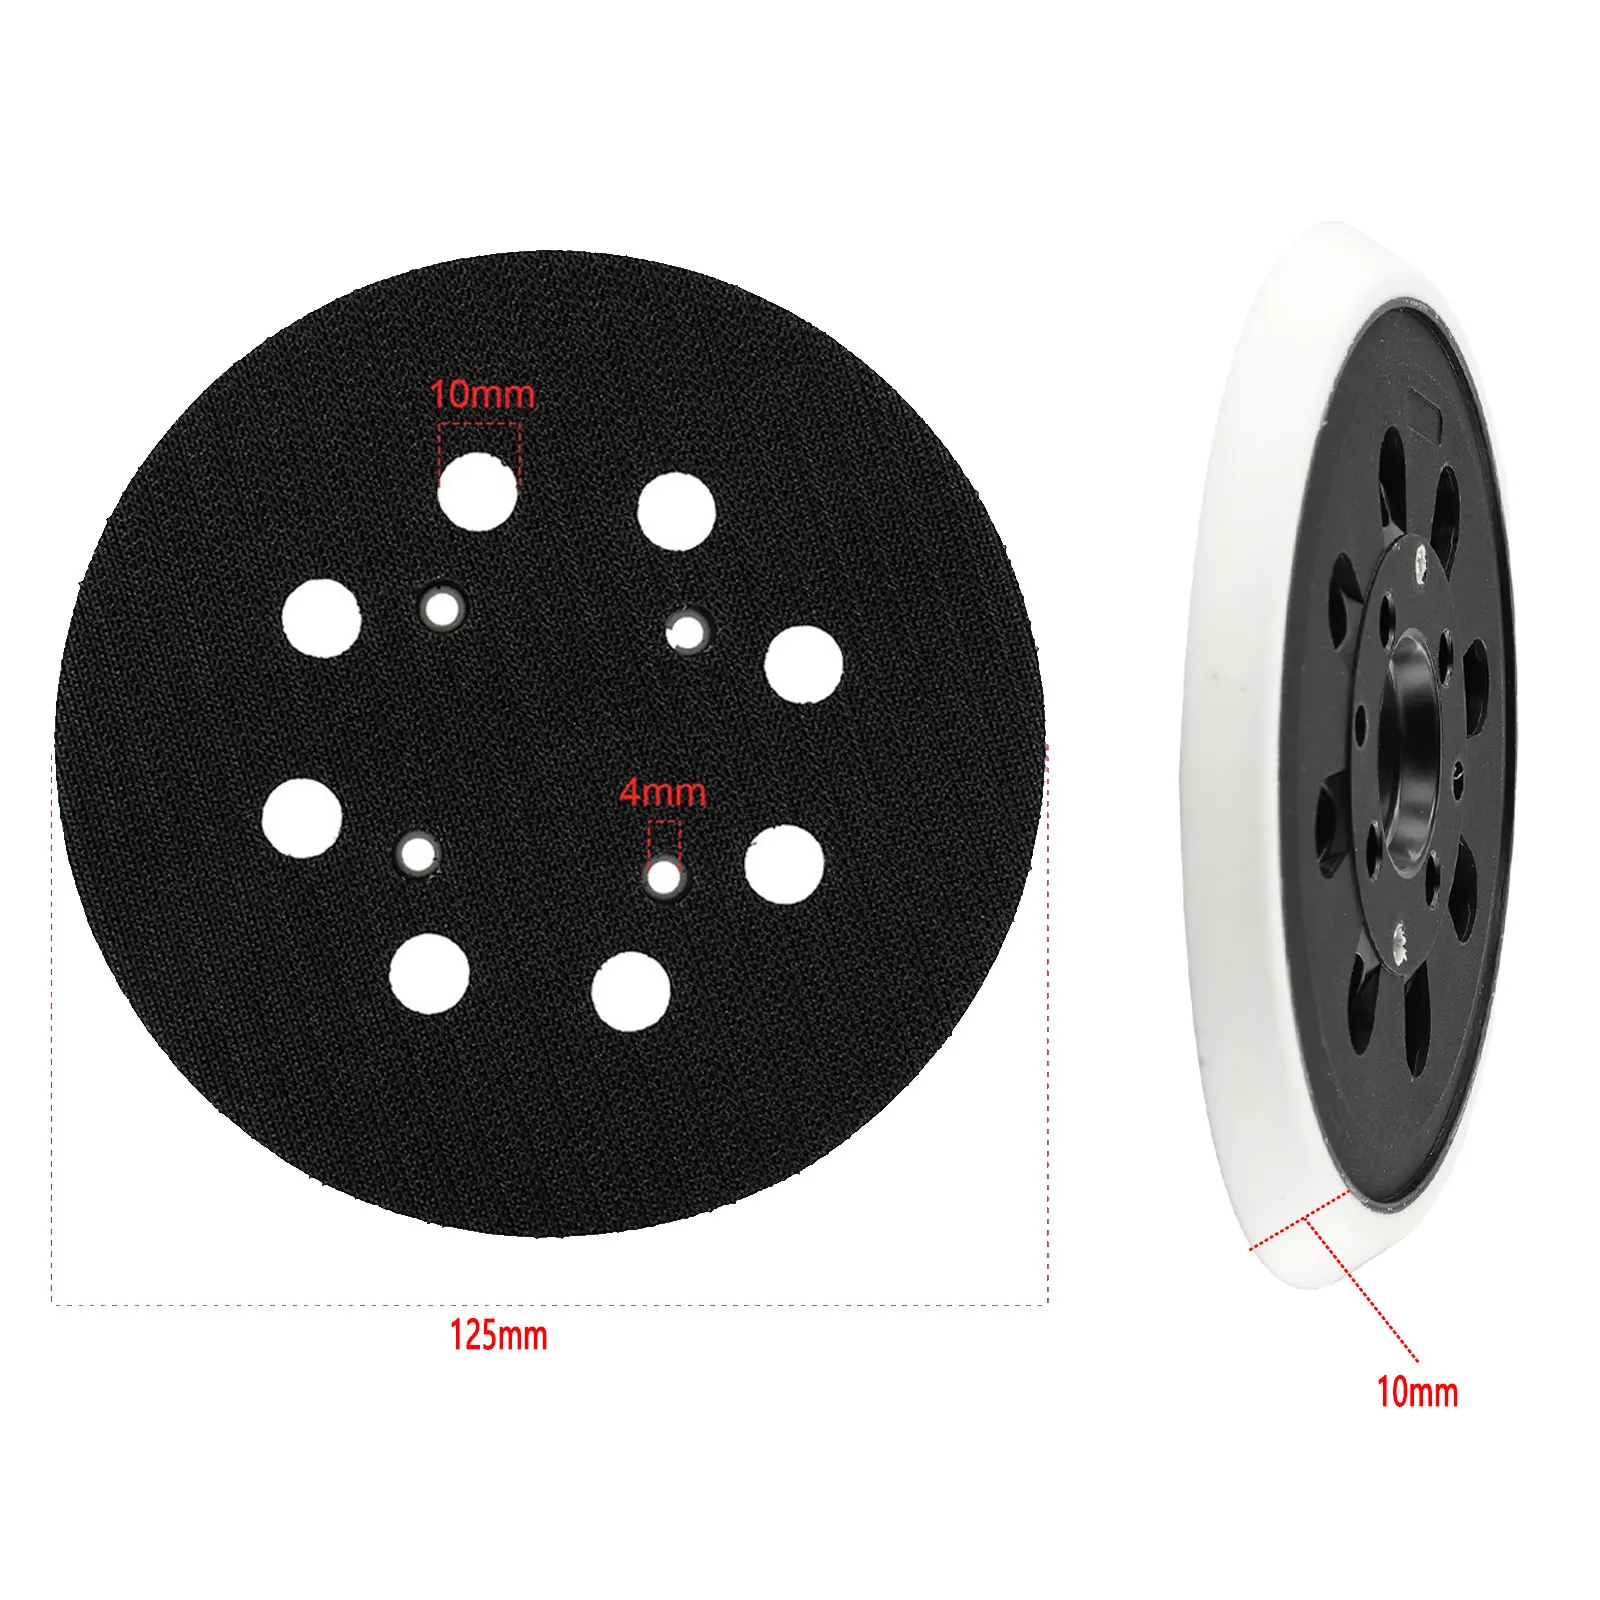 5 Inch 125mm Backing Pad Sanding Pad Hook&loop Connection For Bosch PEX 300 AE 400 AE 4000 AE Power Tools Accessories 5 inch 125mm backing pad sanding pad hook